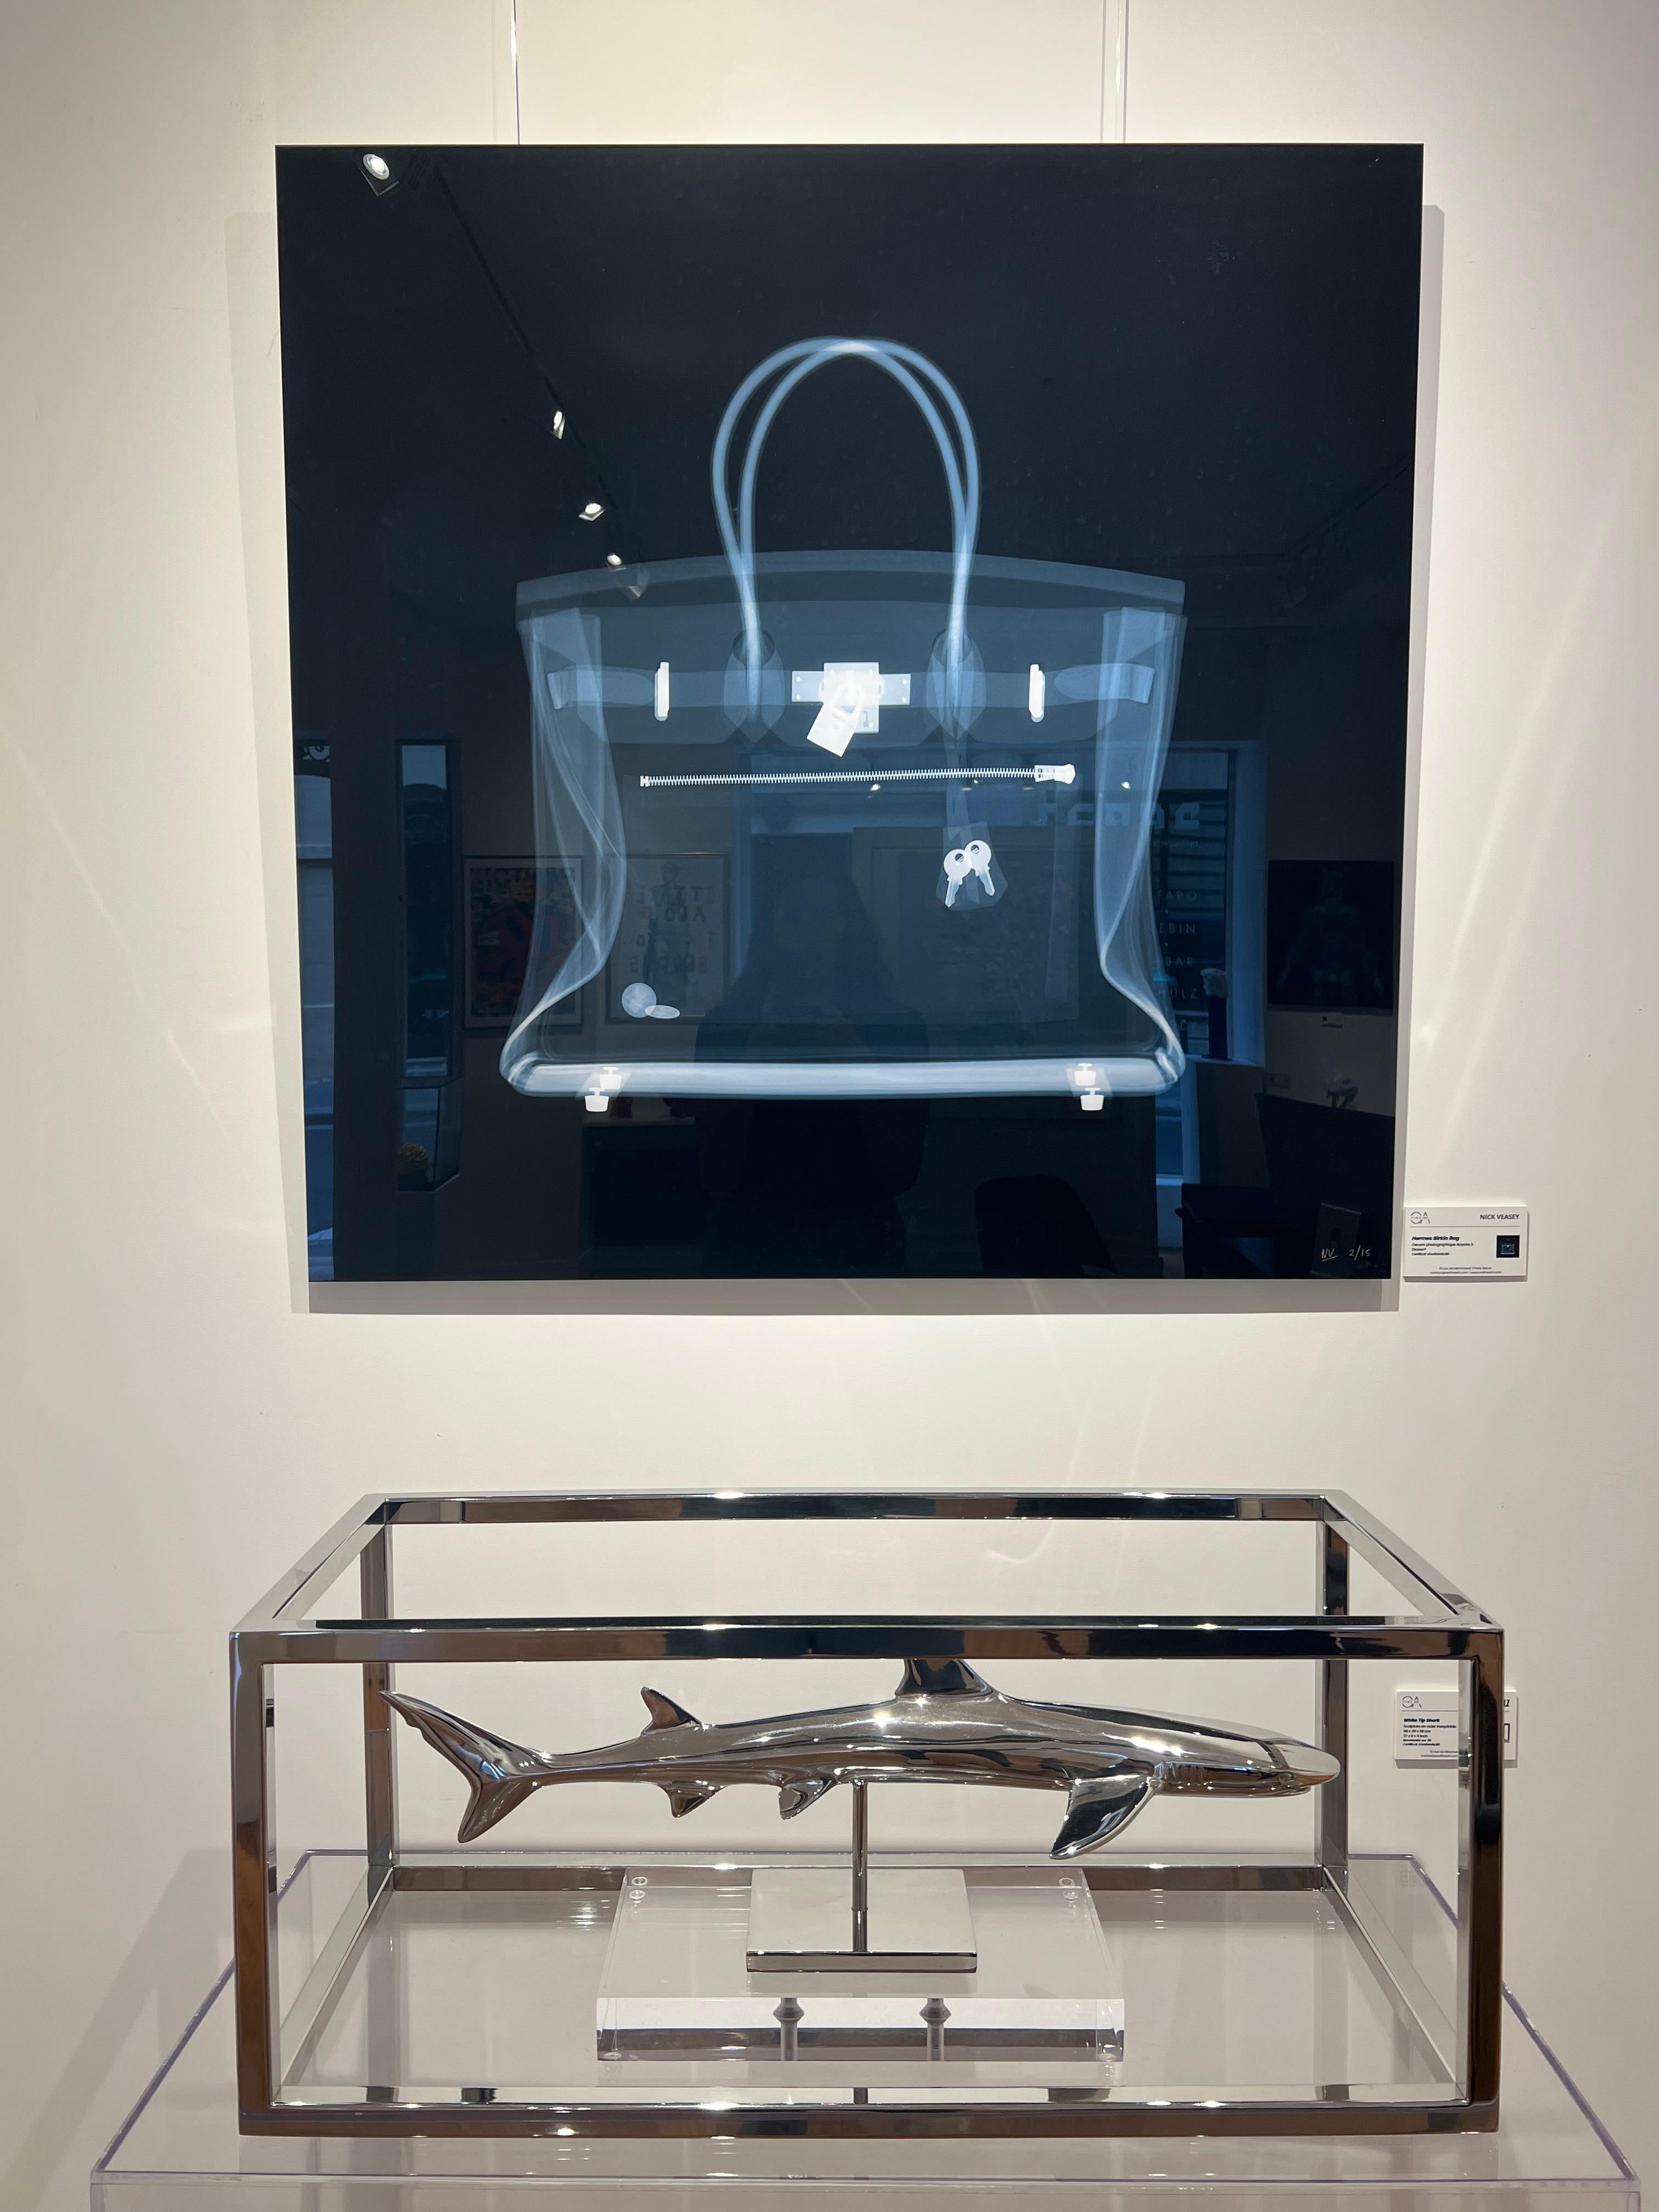 A man with x-ray vision, Nick Veasey creates art that shows what it is really like inside. 
Original artwork.
C print, diasec Framed. Signed and numbered out of 15.
Accompanied with the catalog of the artist and the certificate of authenticity.